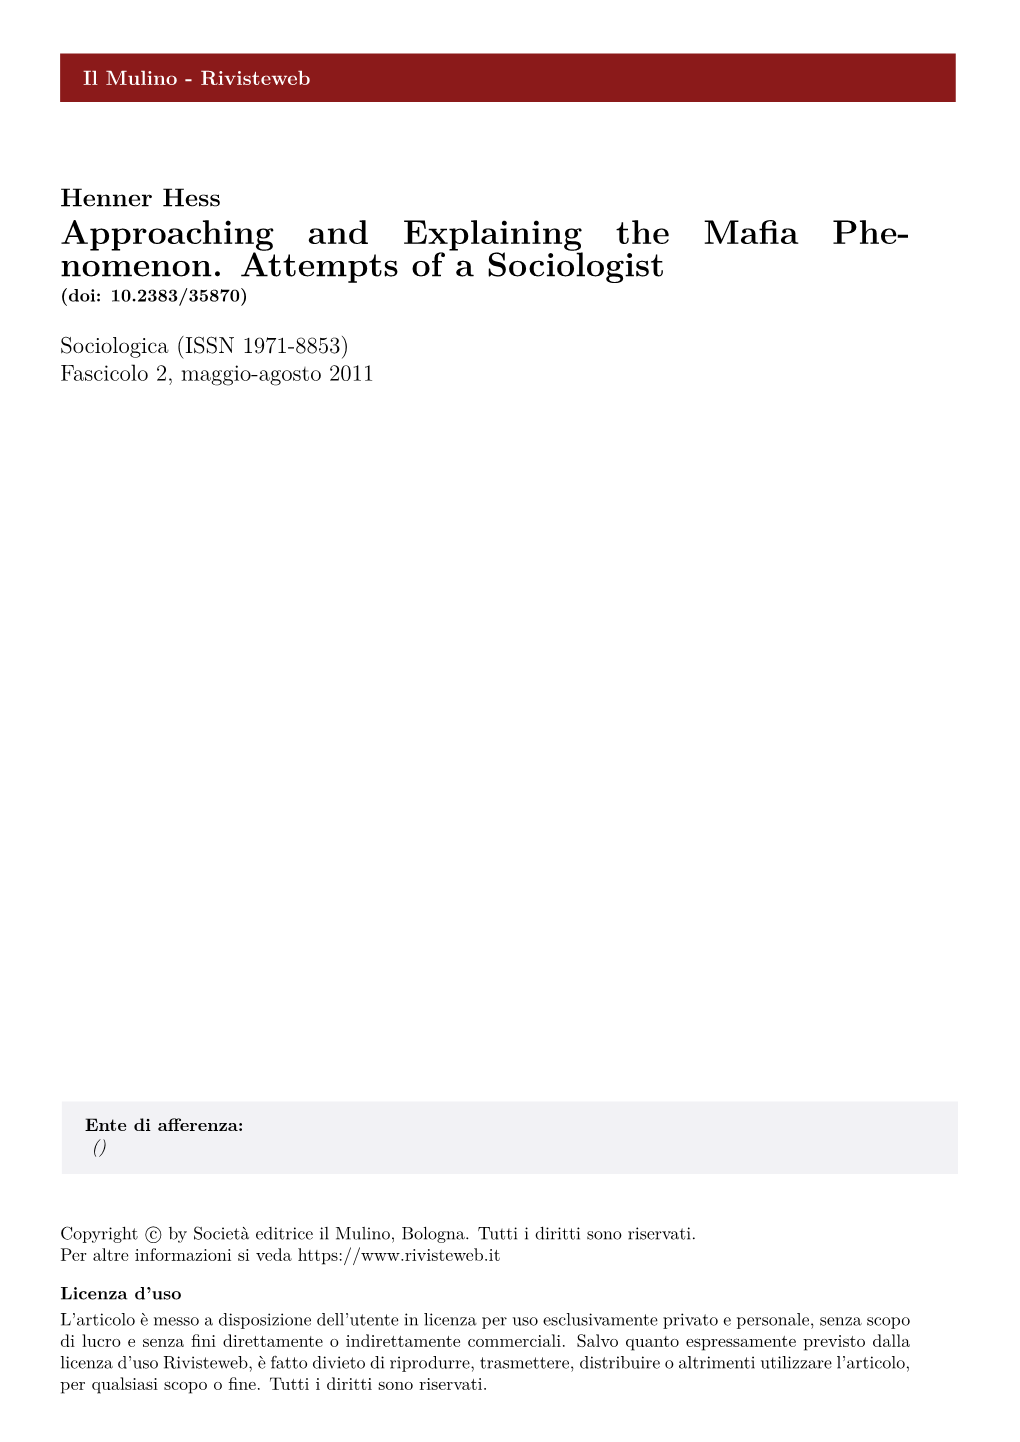 Approaching and Explaining the Mafia Phenomenon Attempts of a Sociologist by Henner Hess Doi: 10.2383/35870